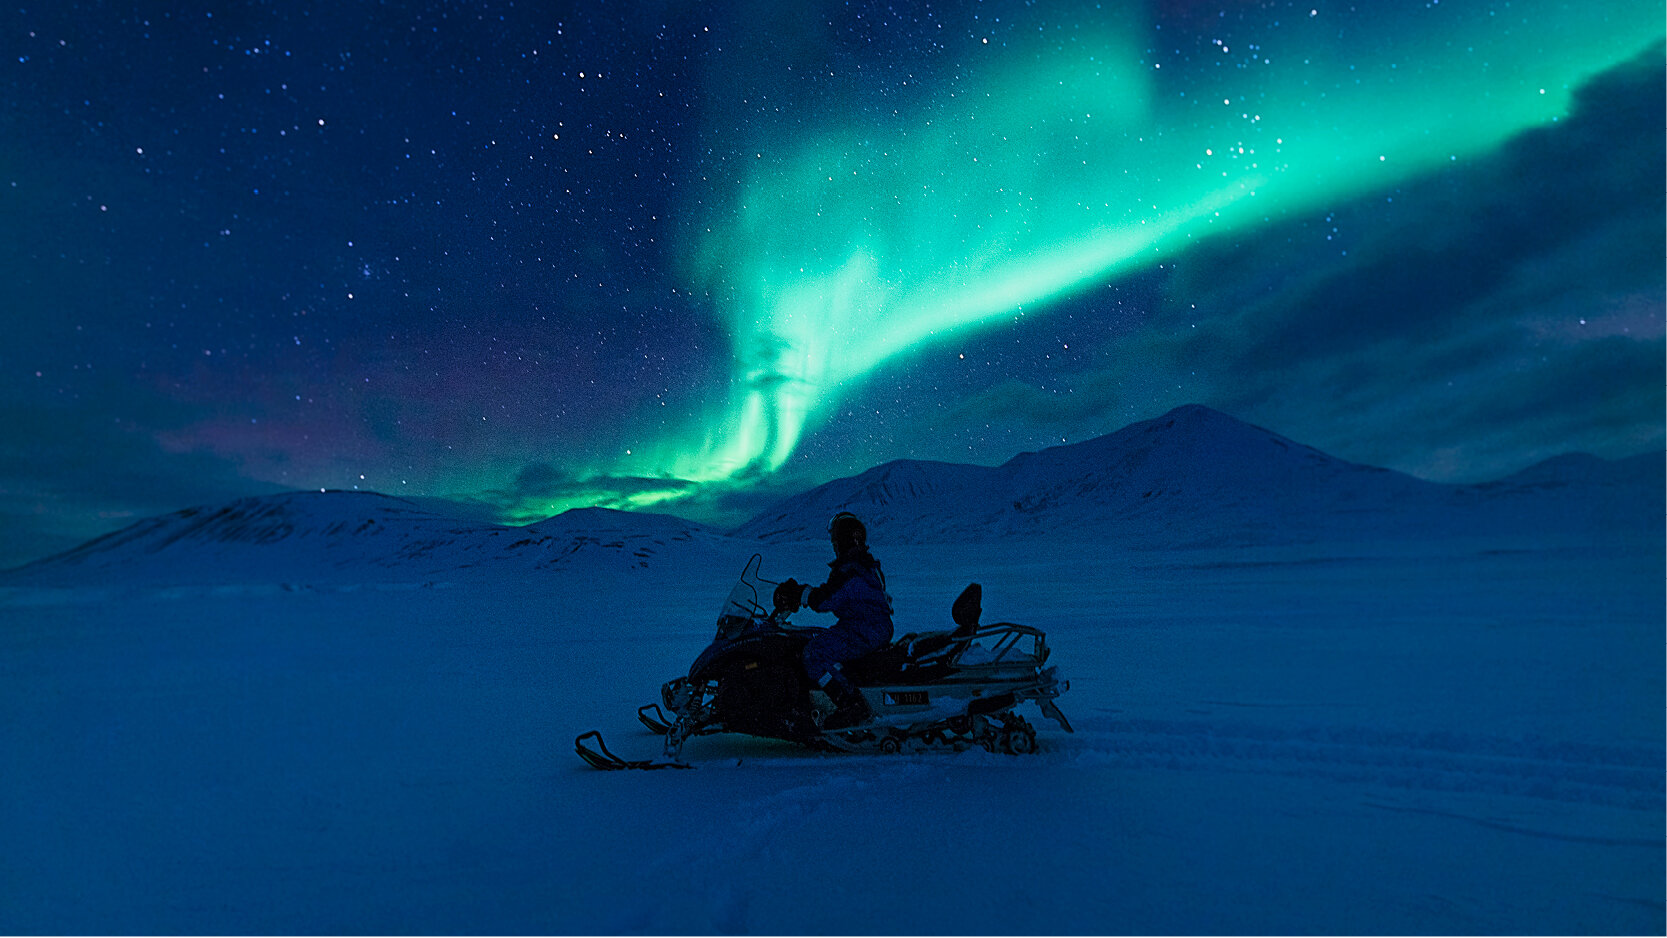 Hunt the Northern Lights in Svalbard, Norway